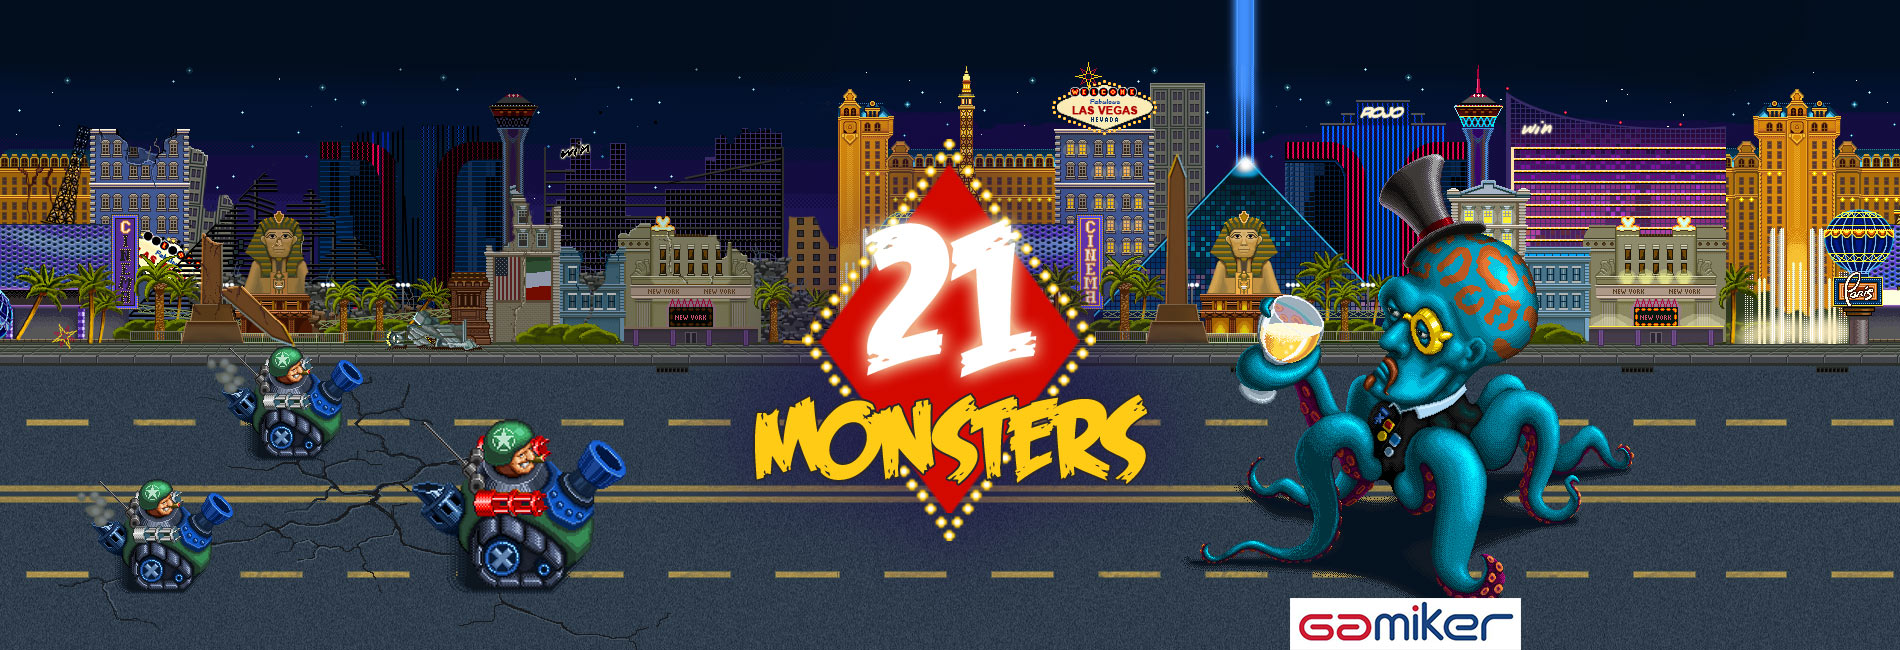 21 Monsters